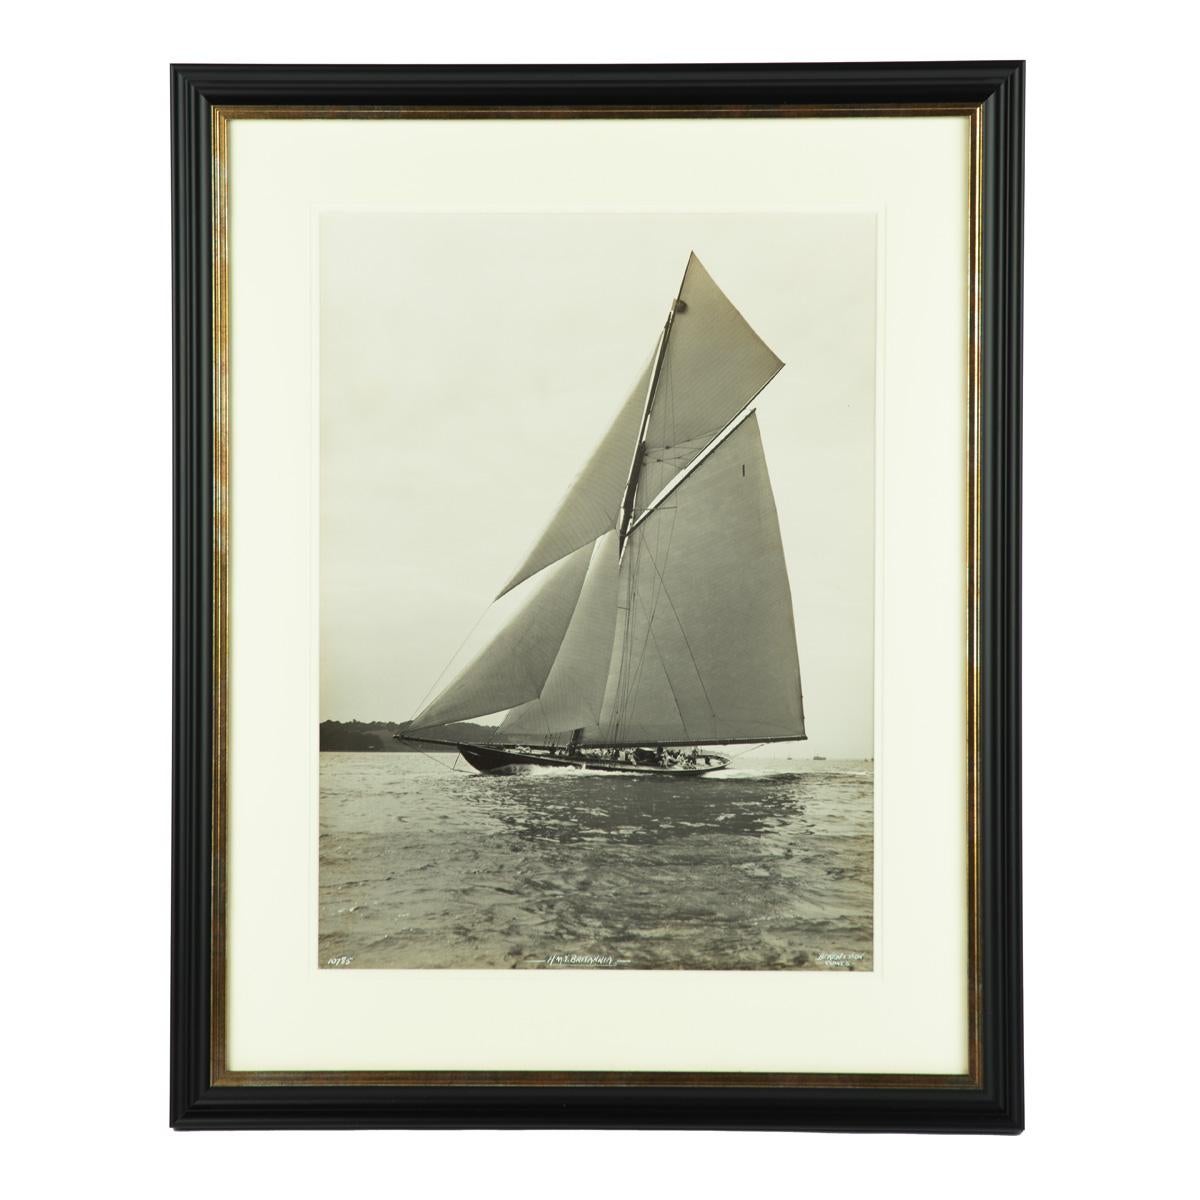 A large silver gelatin photographic print of H.M.Y. Britannia by Beken, on an easterly course on starboard taking, passing Cowes., Inscribed in white ‘H. M. Y. Britannia, No. 10785, Beken & Sons, Cowes’. English, circa 1930.

